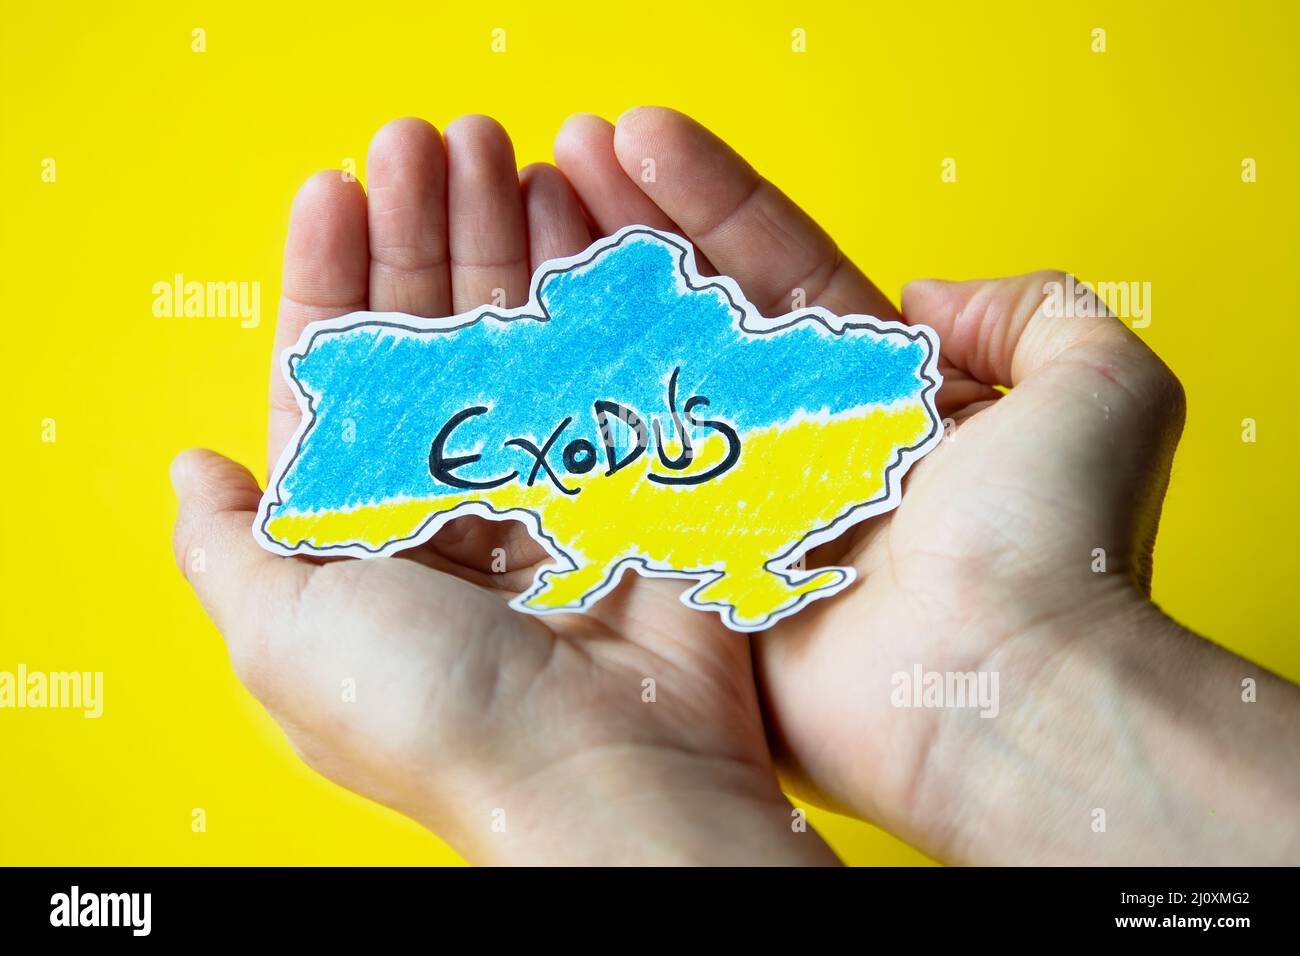 woman's hands hold the map of ukraine painted in the colors of its flag with the word exodus written on it representing the massive flight of the civi Stock Photo